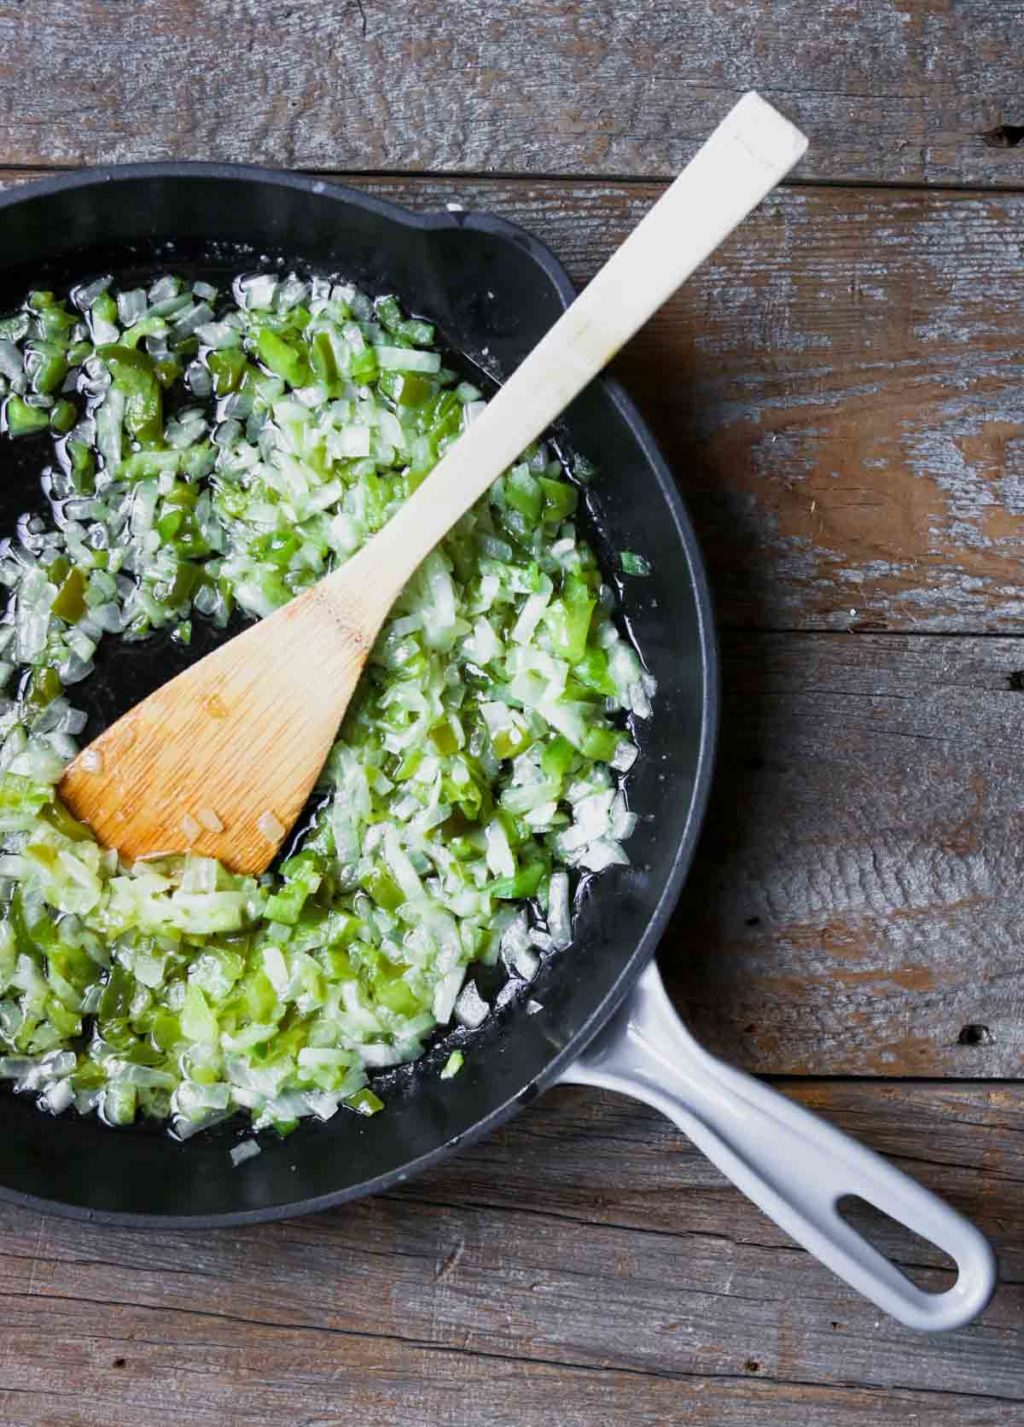 Onions and green peppers in a saute pan